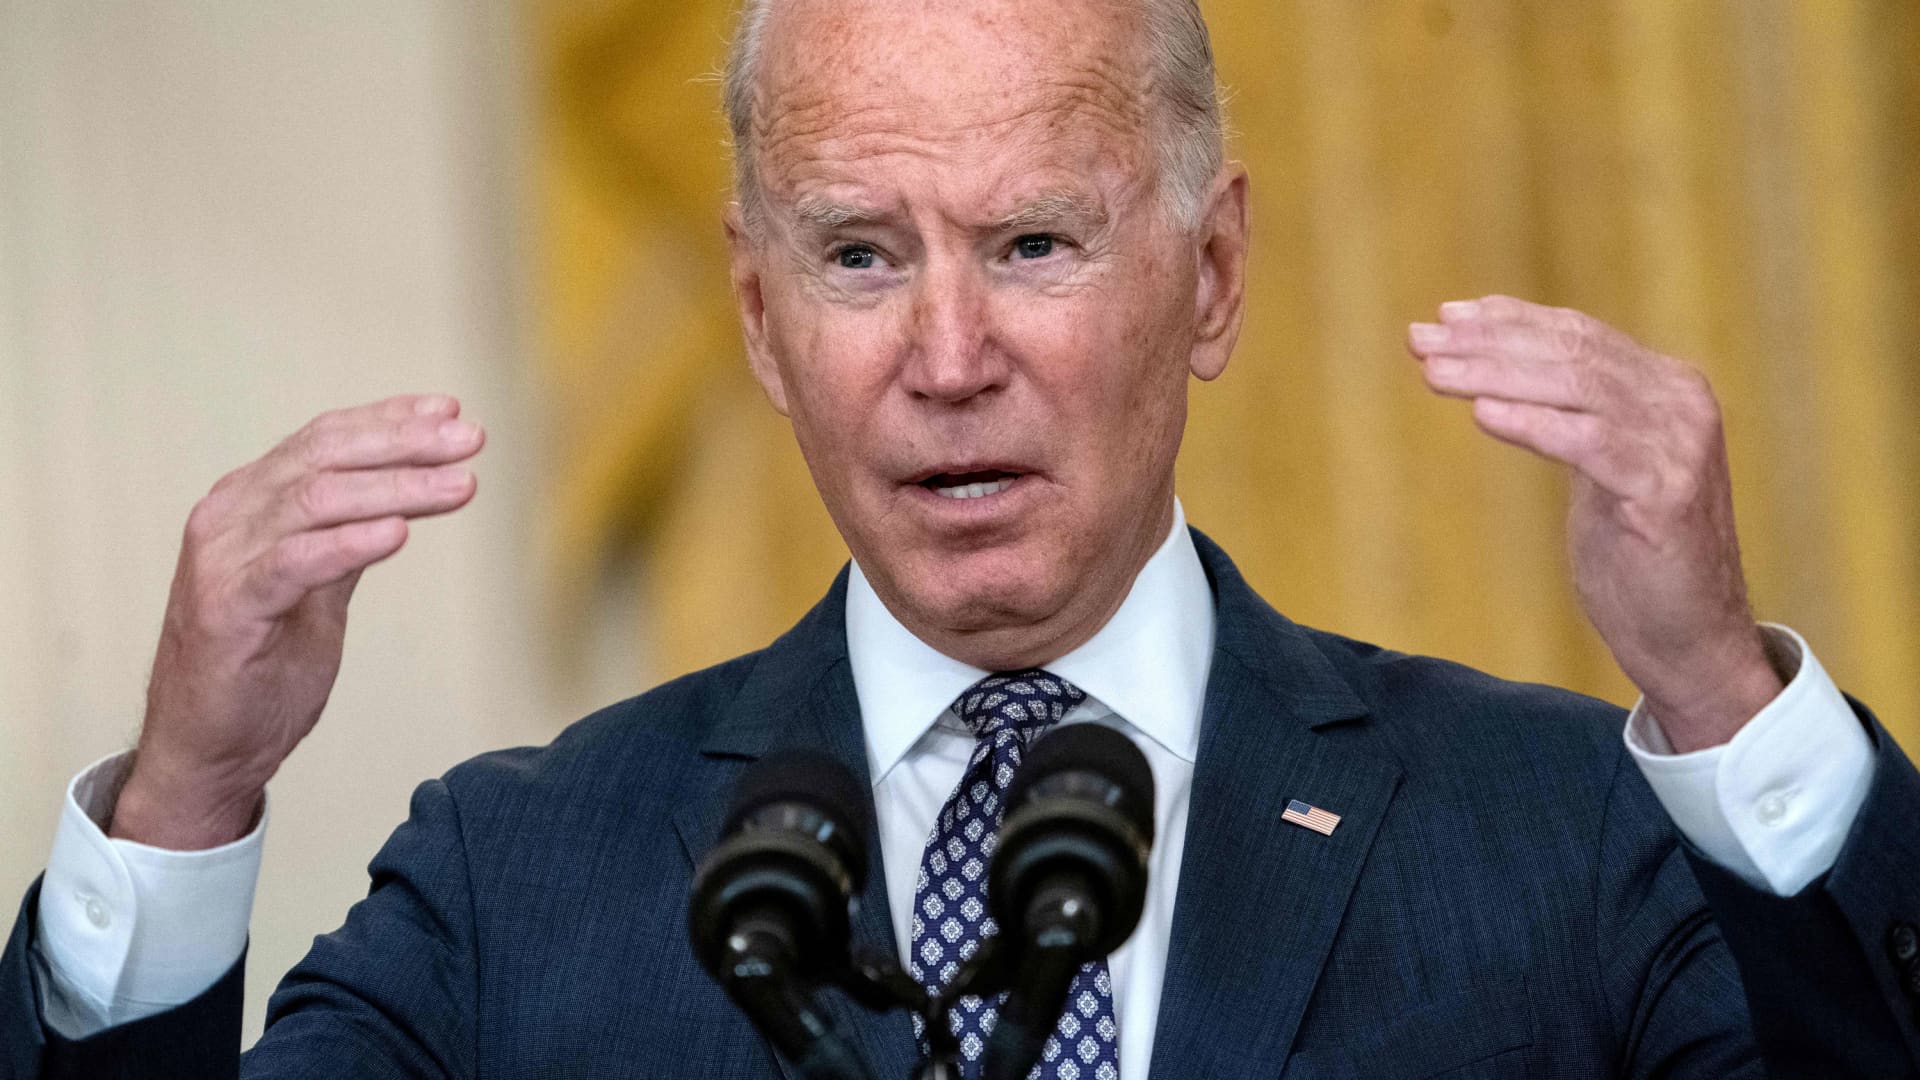 US President Joe Biden responds to questions about the ongoing US military evacuations of US citizens and vulnerable Afghans, in the East Room of the White House in Washington, DC, on August 20, 2021.